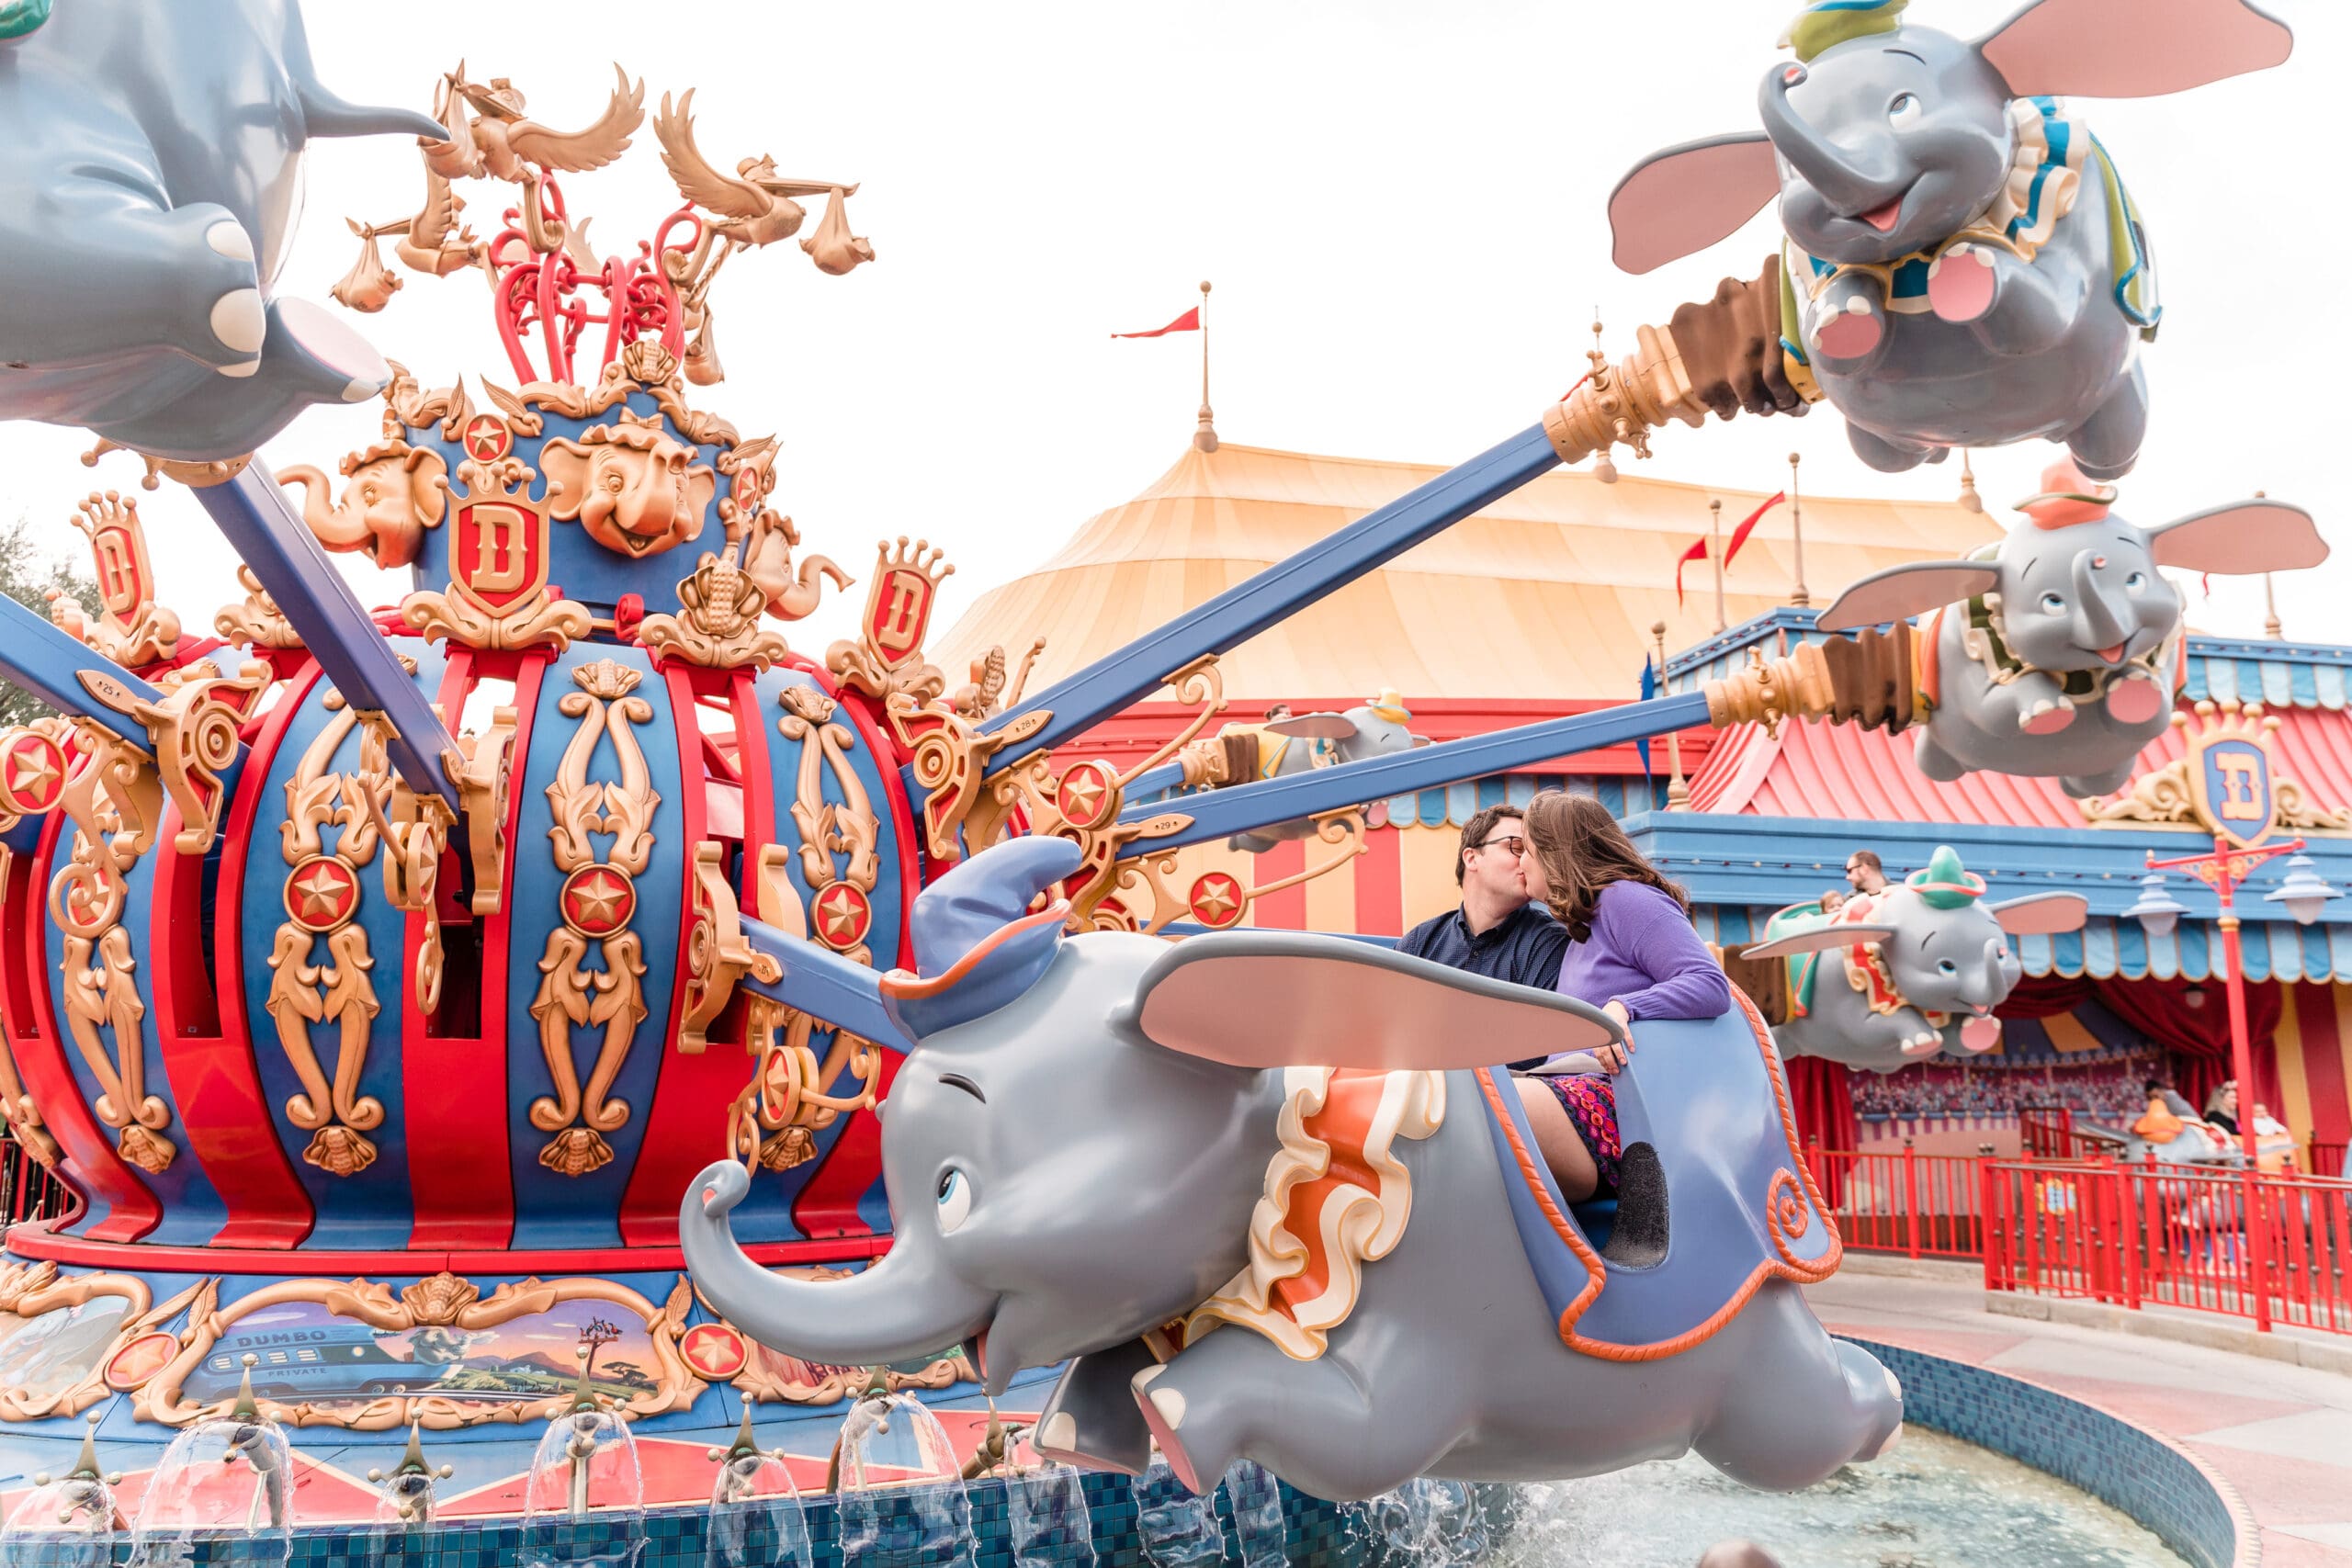 Couple kissing on the Dumbo ride, capturing their love at Disney in this classic ride.